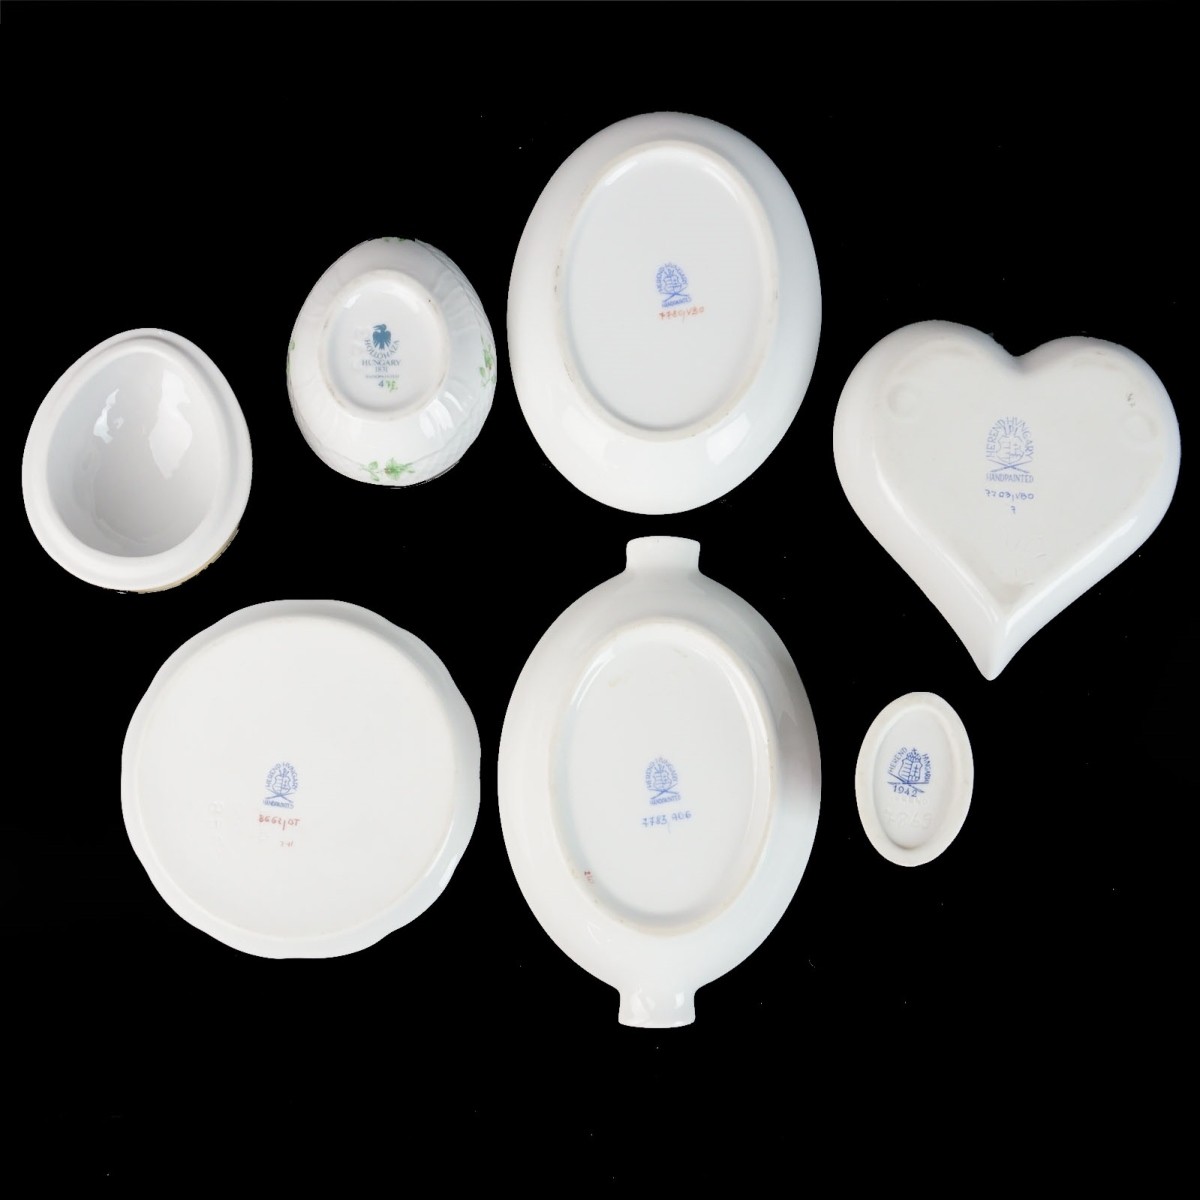 Herend and Hollohaza Porcelain